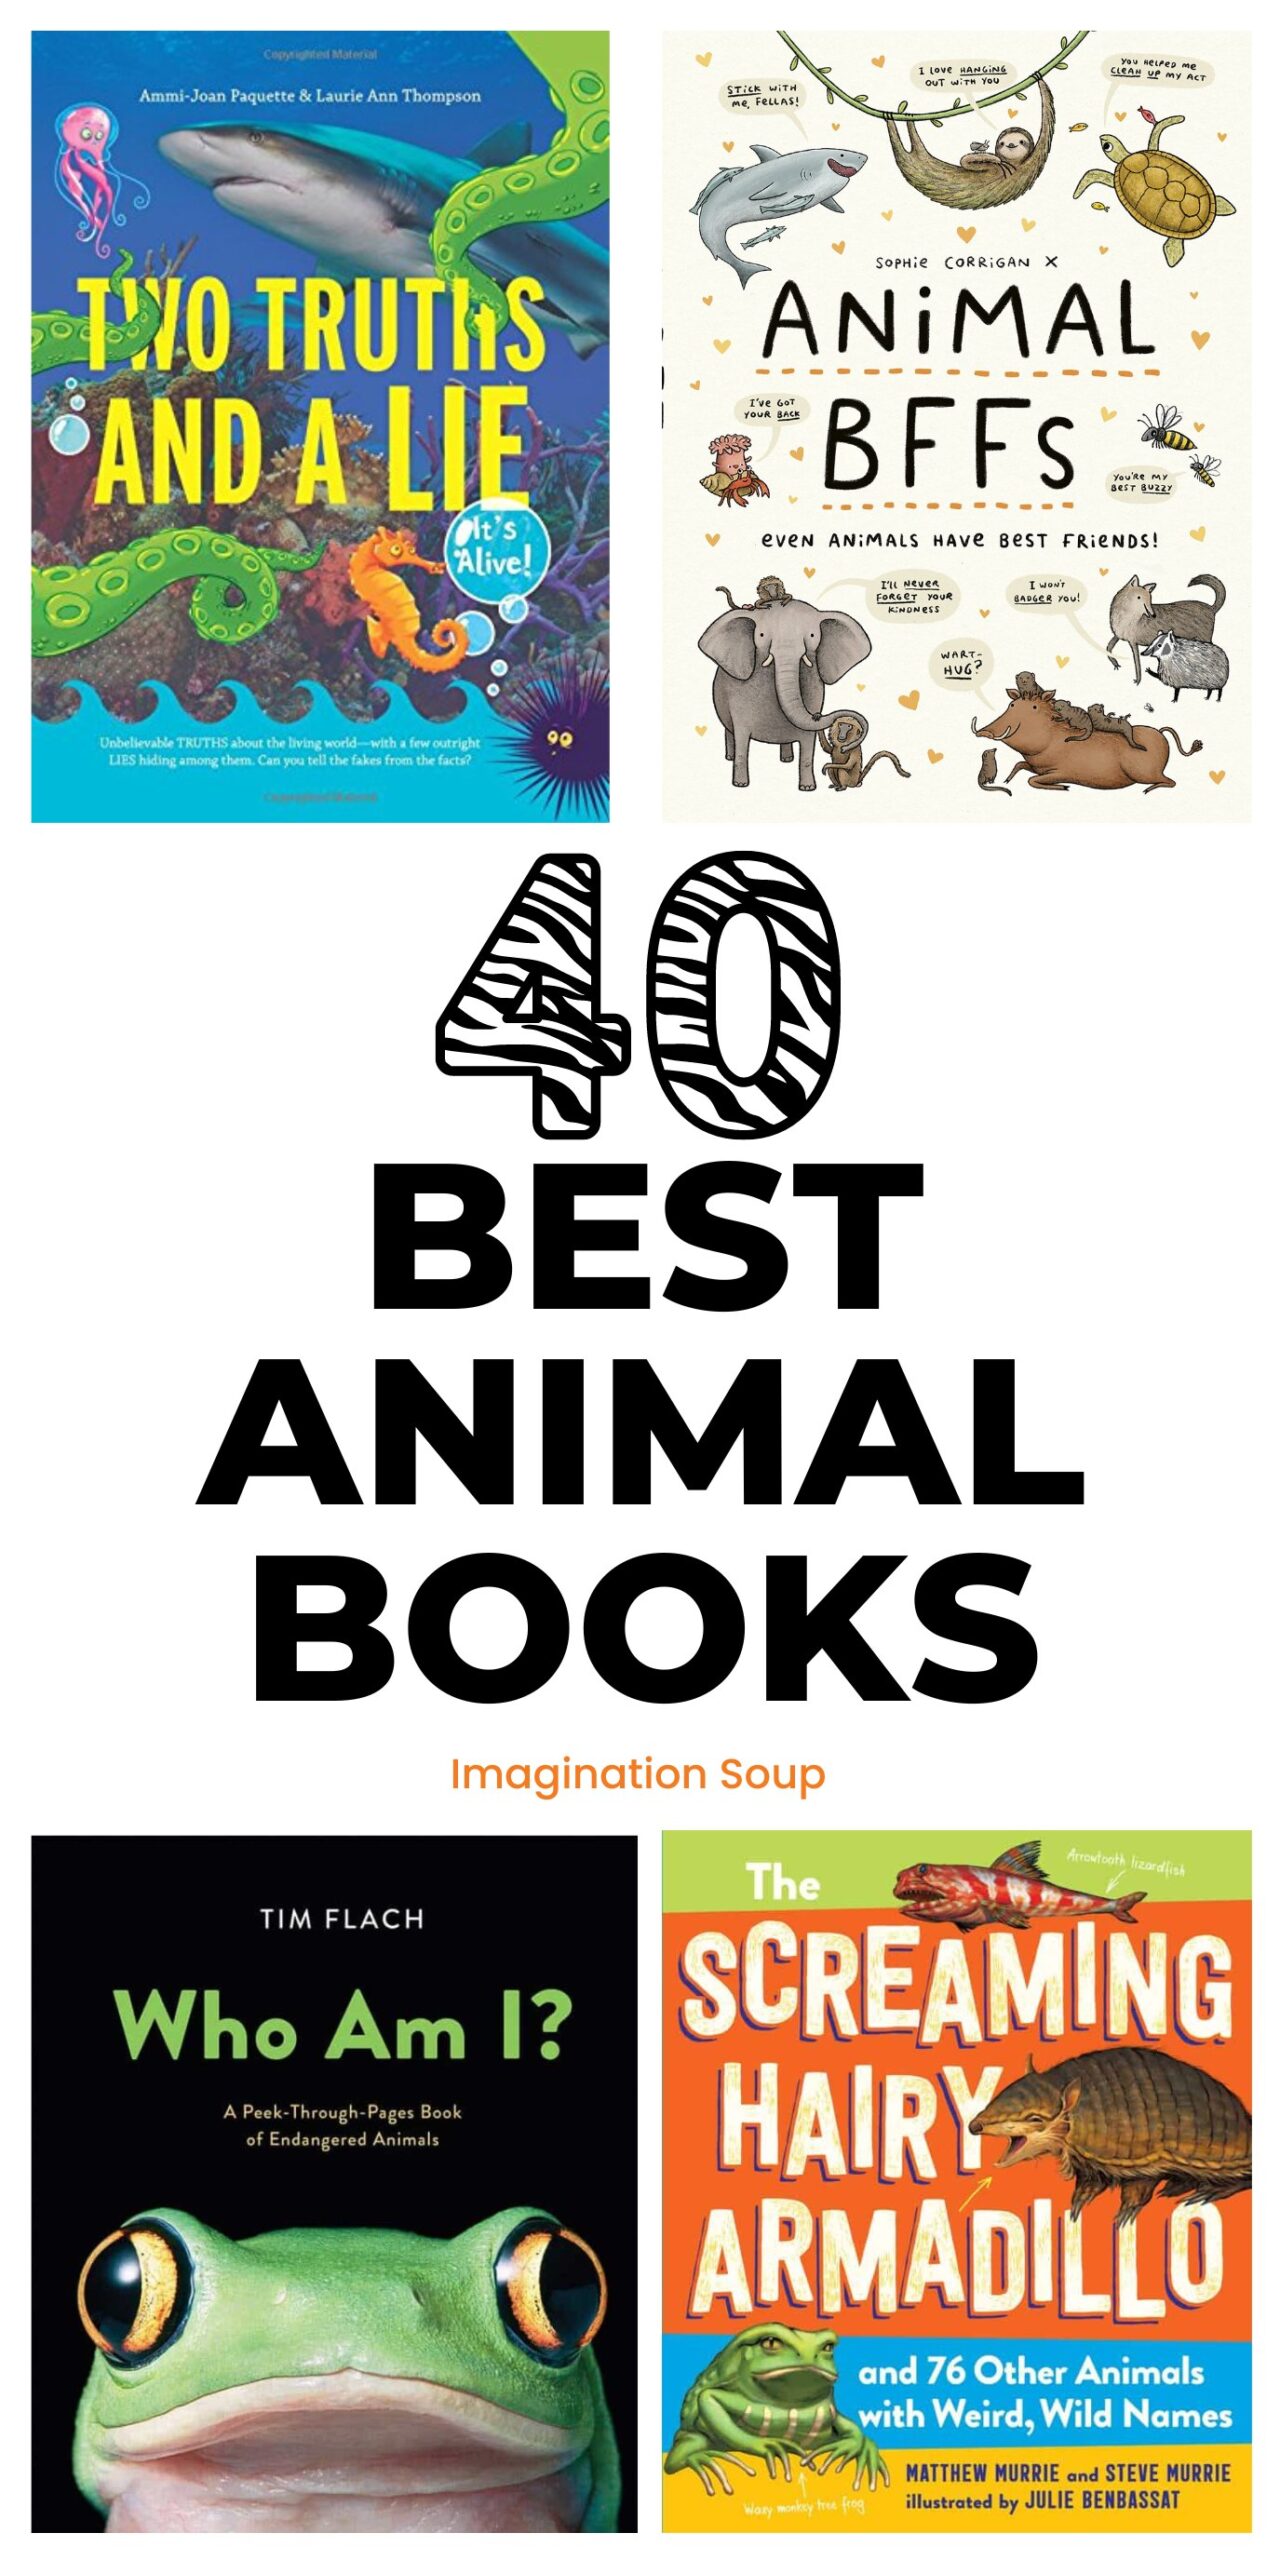 Why should we read children's nonfiction animal books? Teaching kids about animals is akin to teaching colors and numbers. Right? Children love to learn how to identify dogs, cats, cows, and chickens. Even better when they can make the animal noise, right?